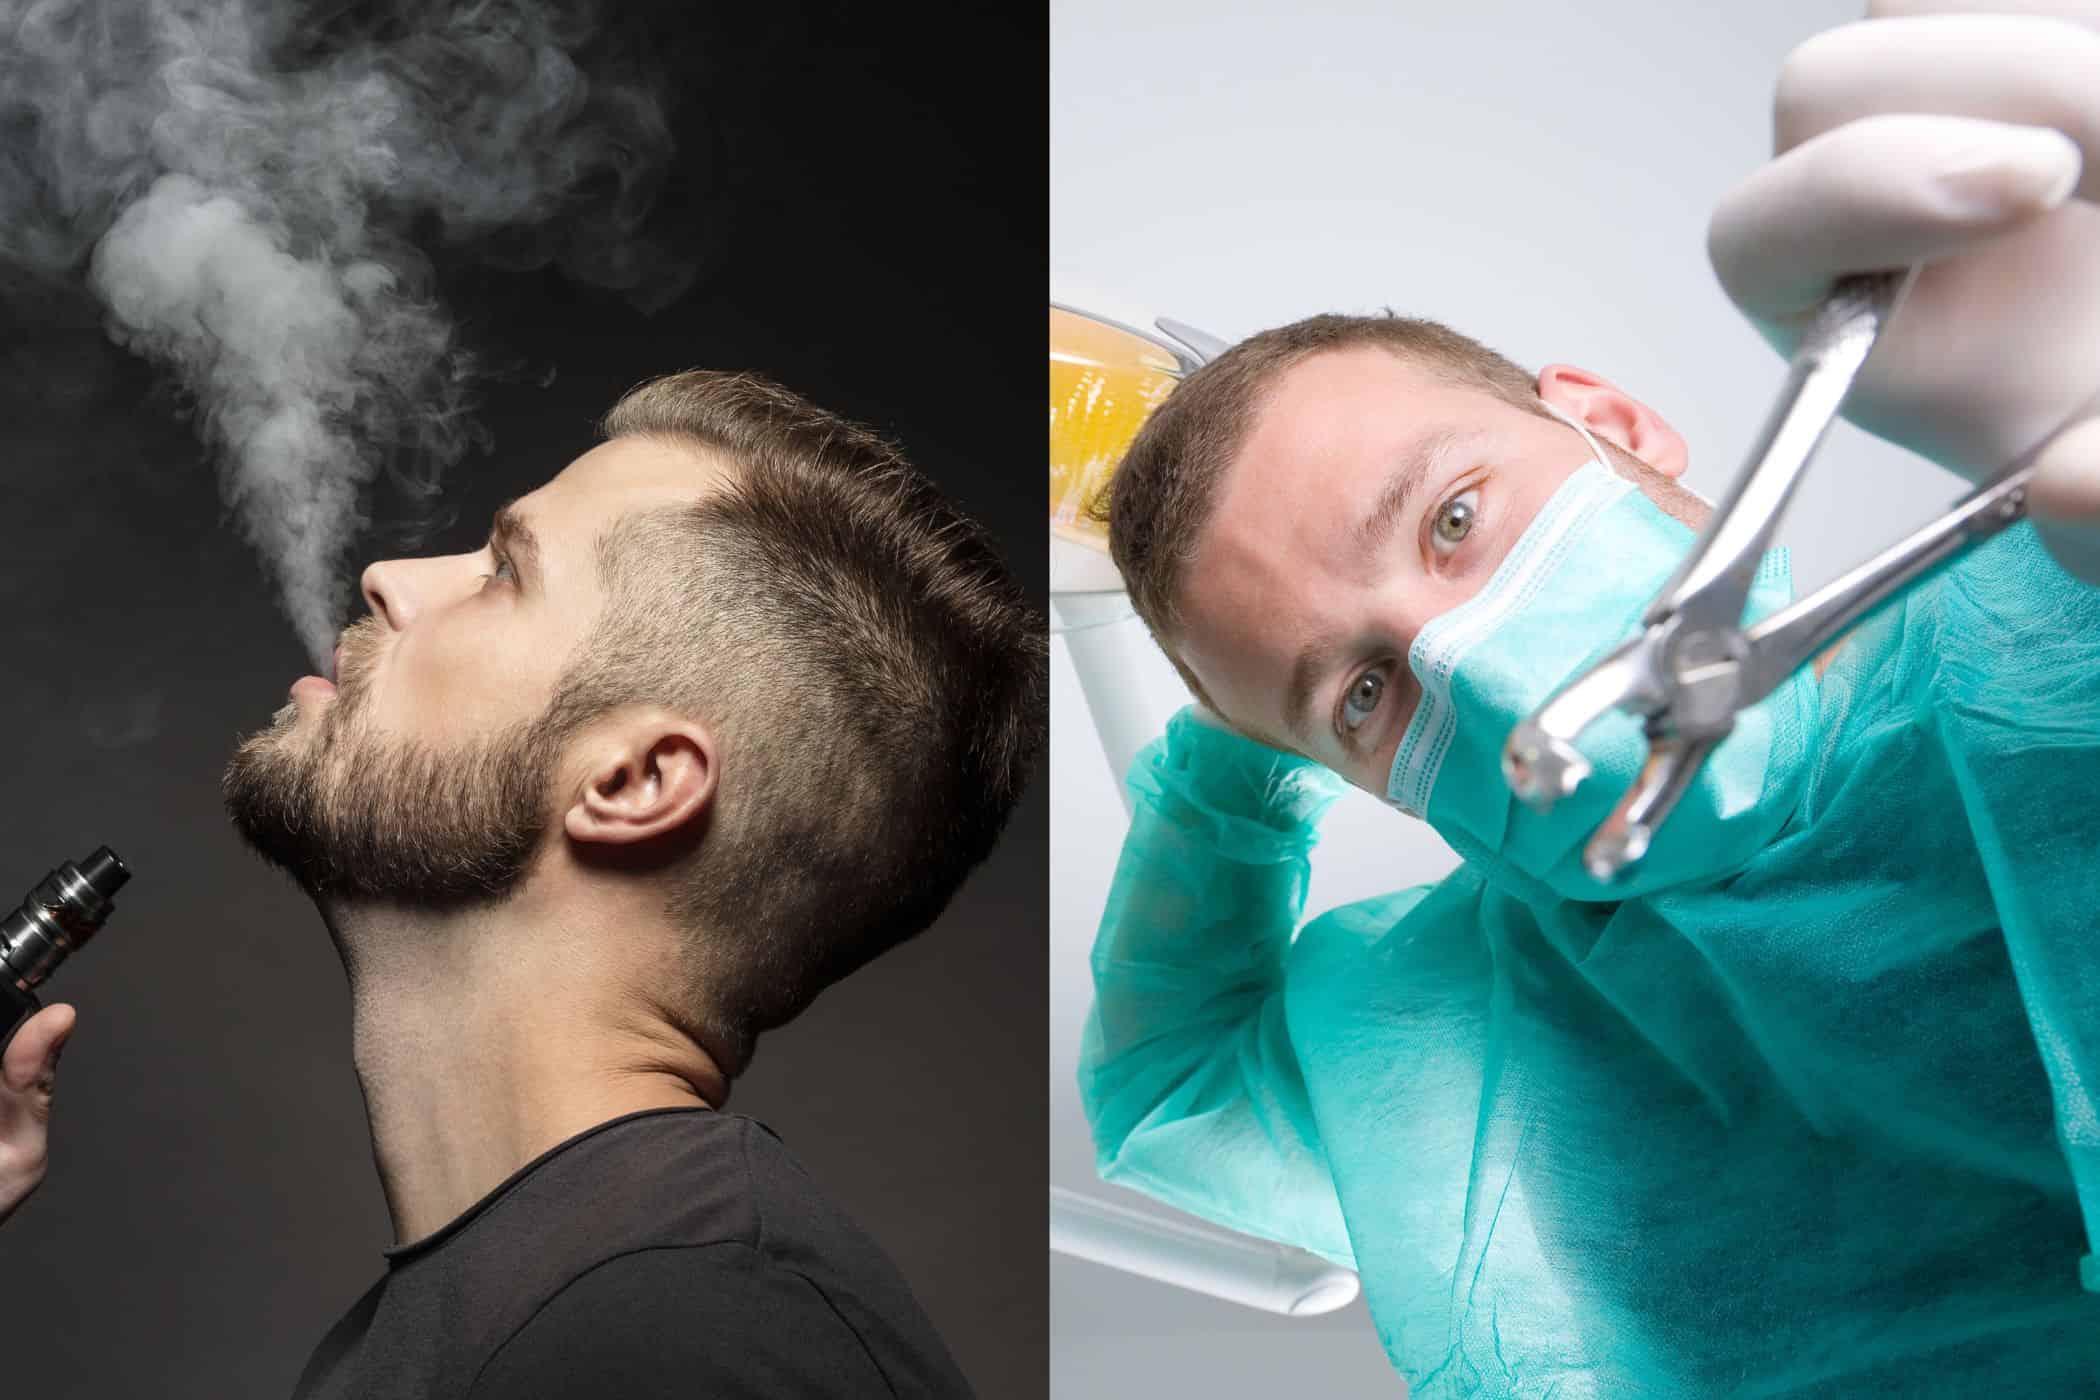 Vaping after tooth extraction with gauze: guidelines and risks